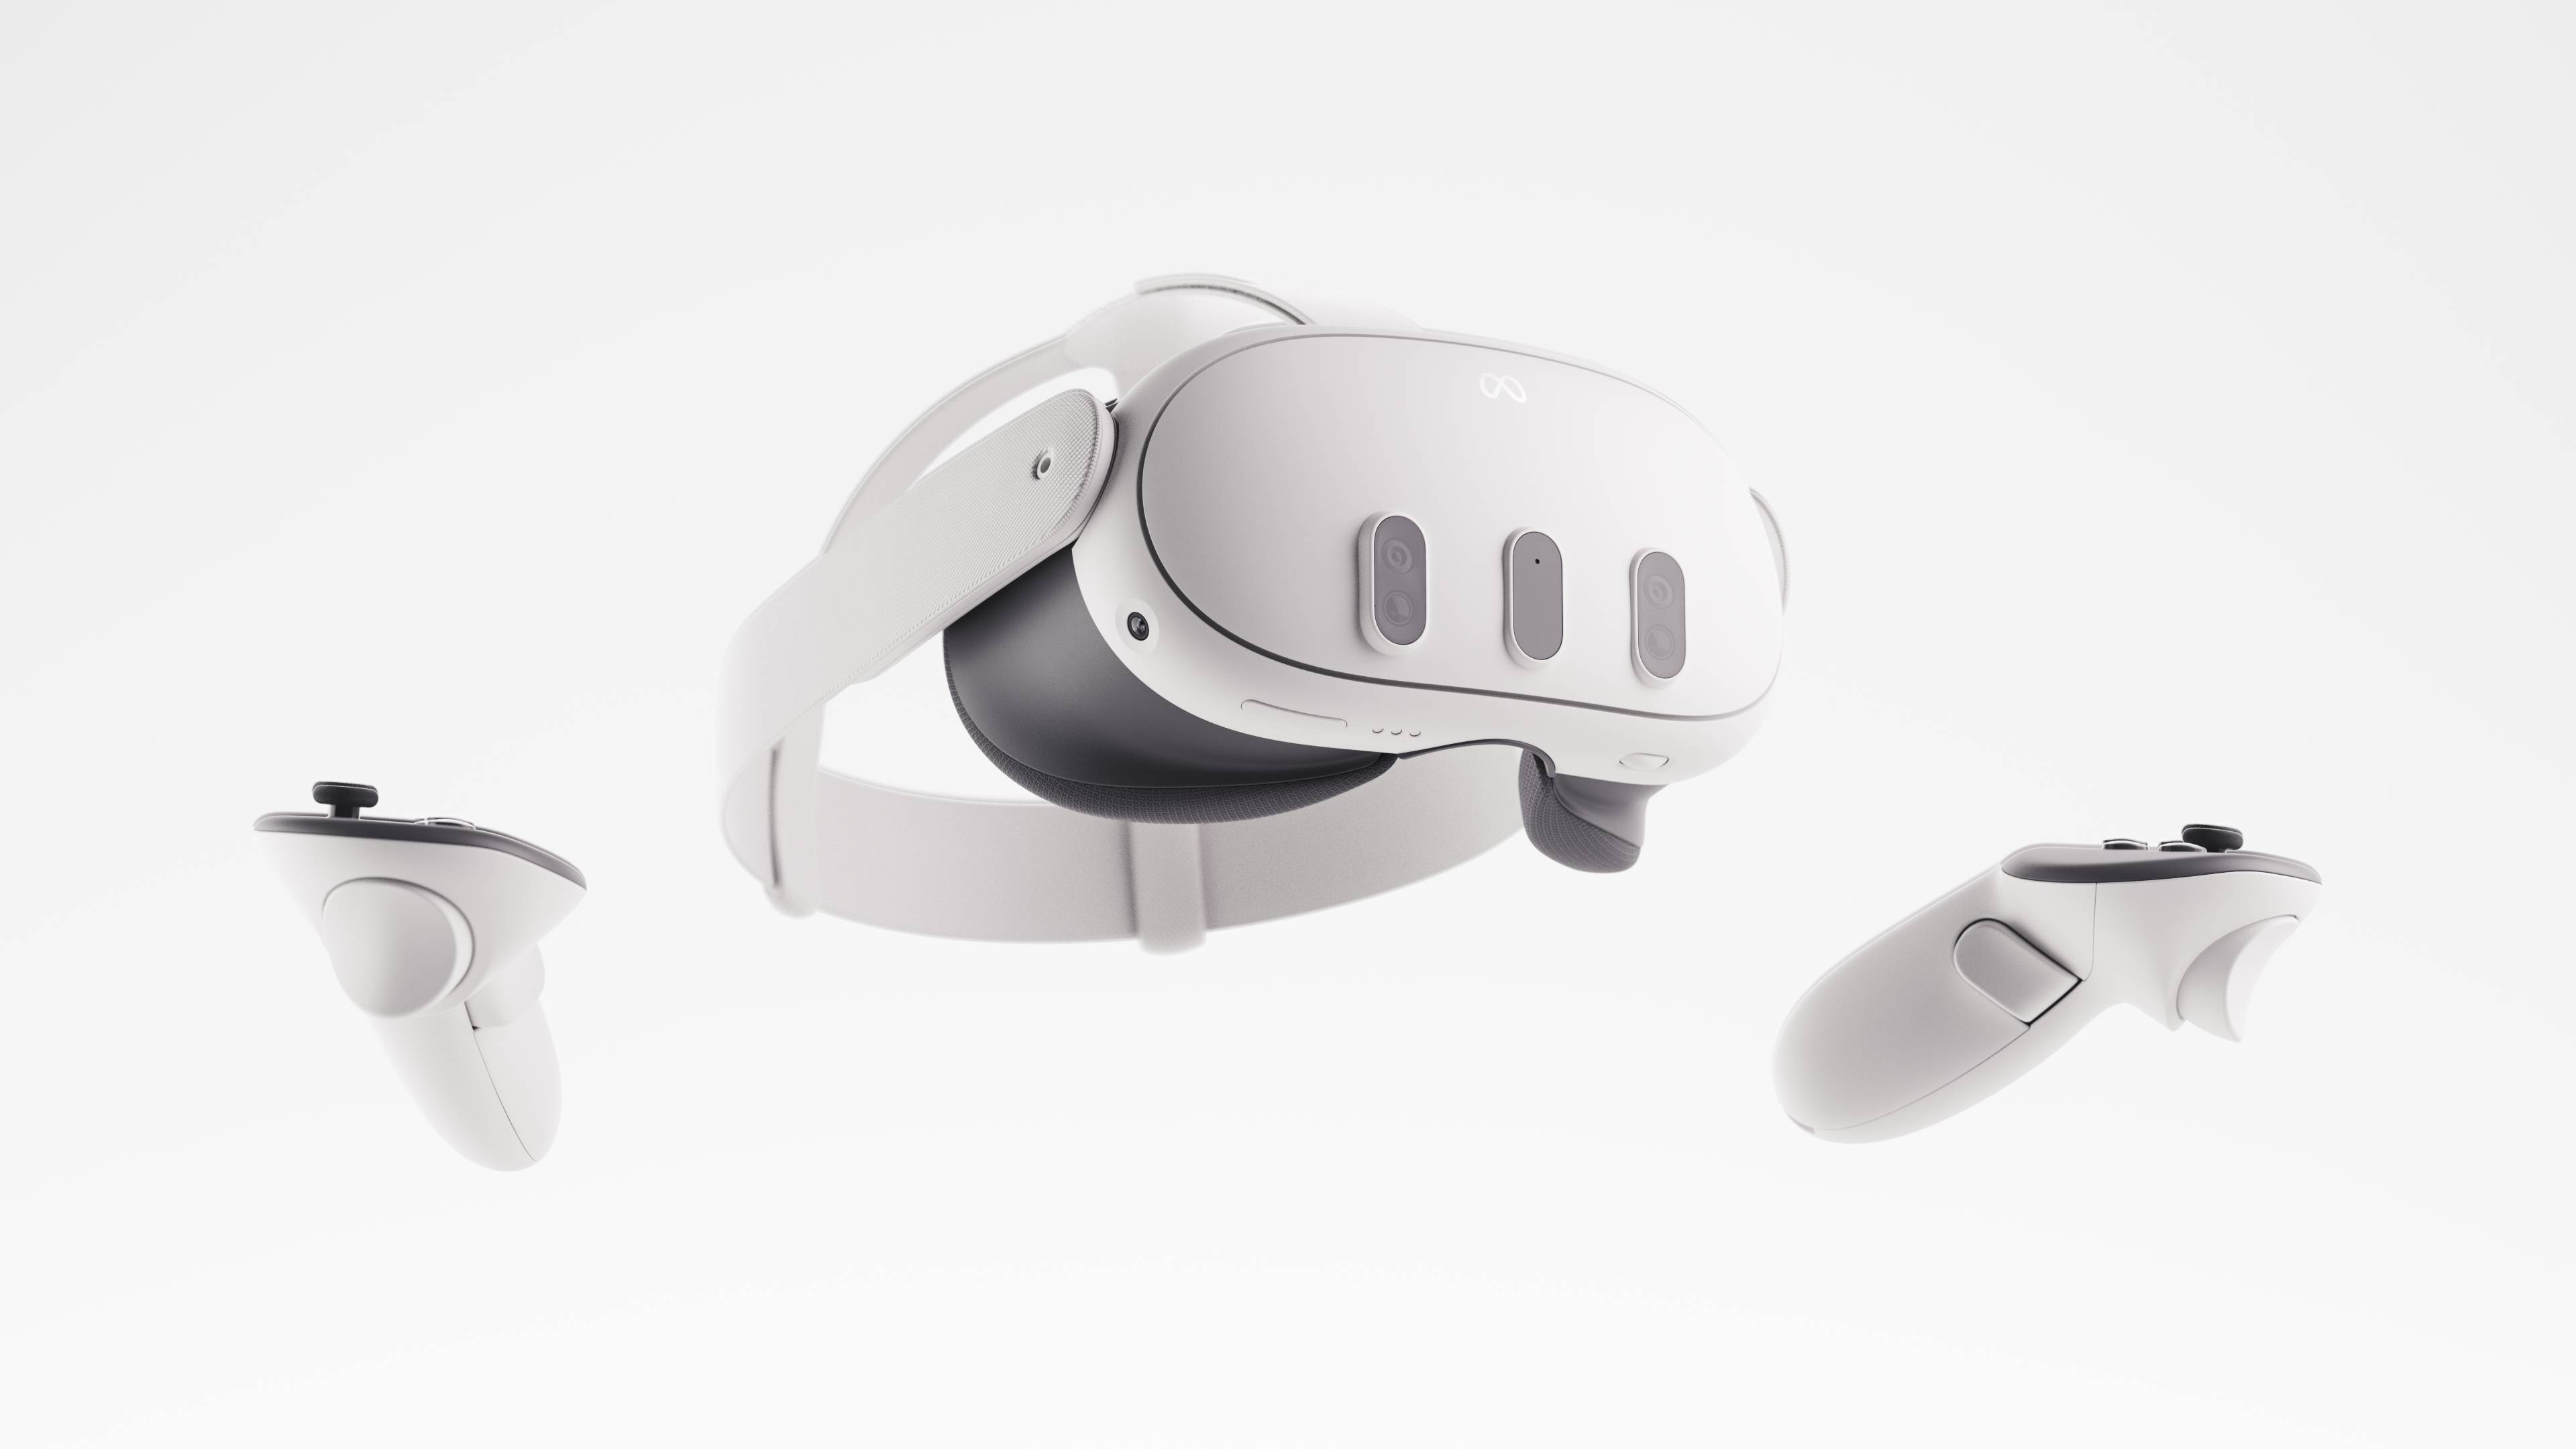 Introducing Oculus Quest 2, the Next Generation of All-in-One VR